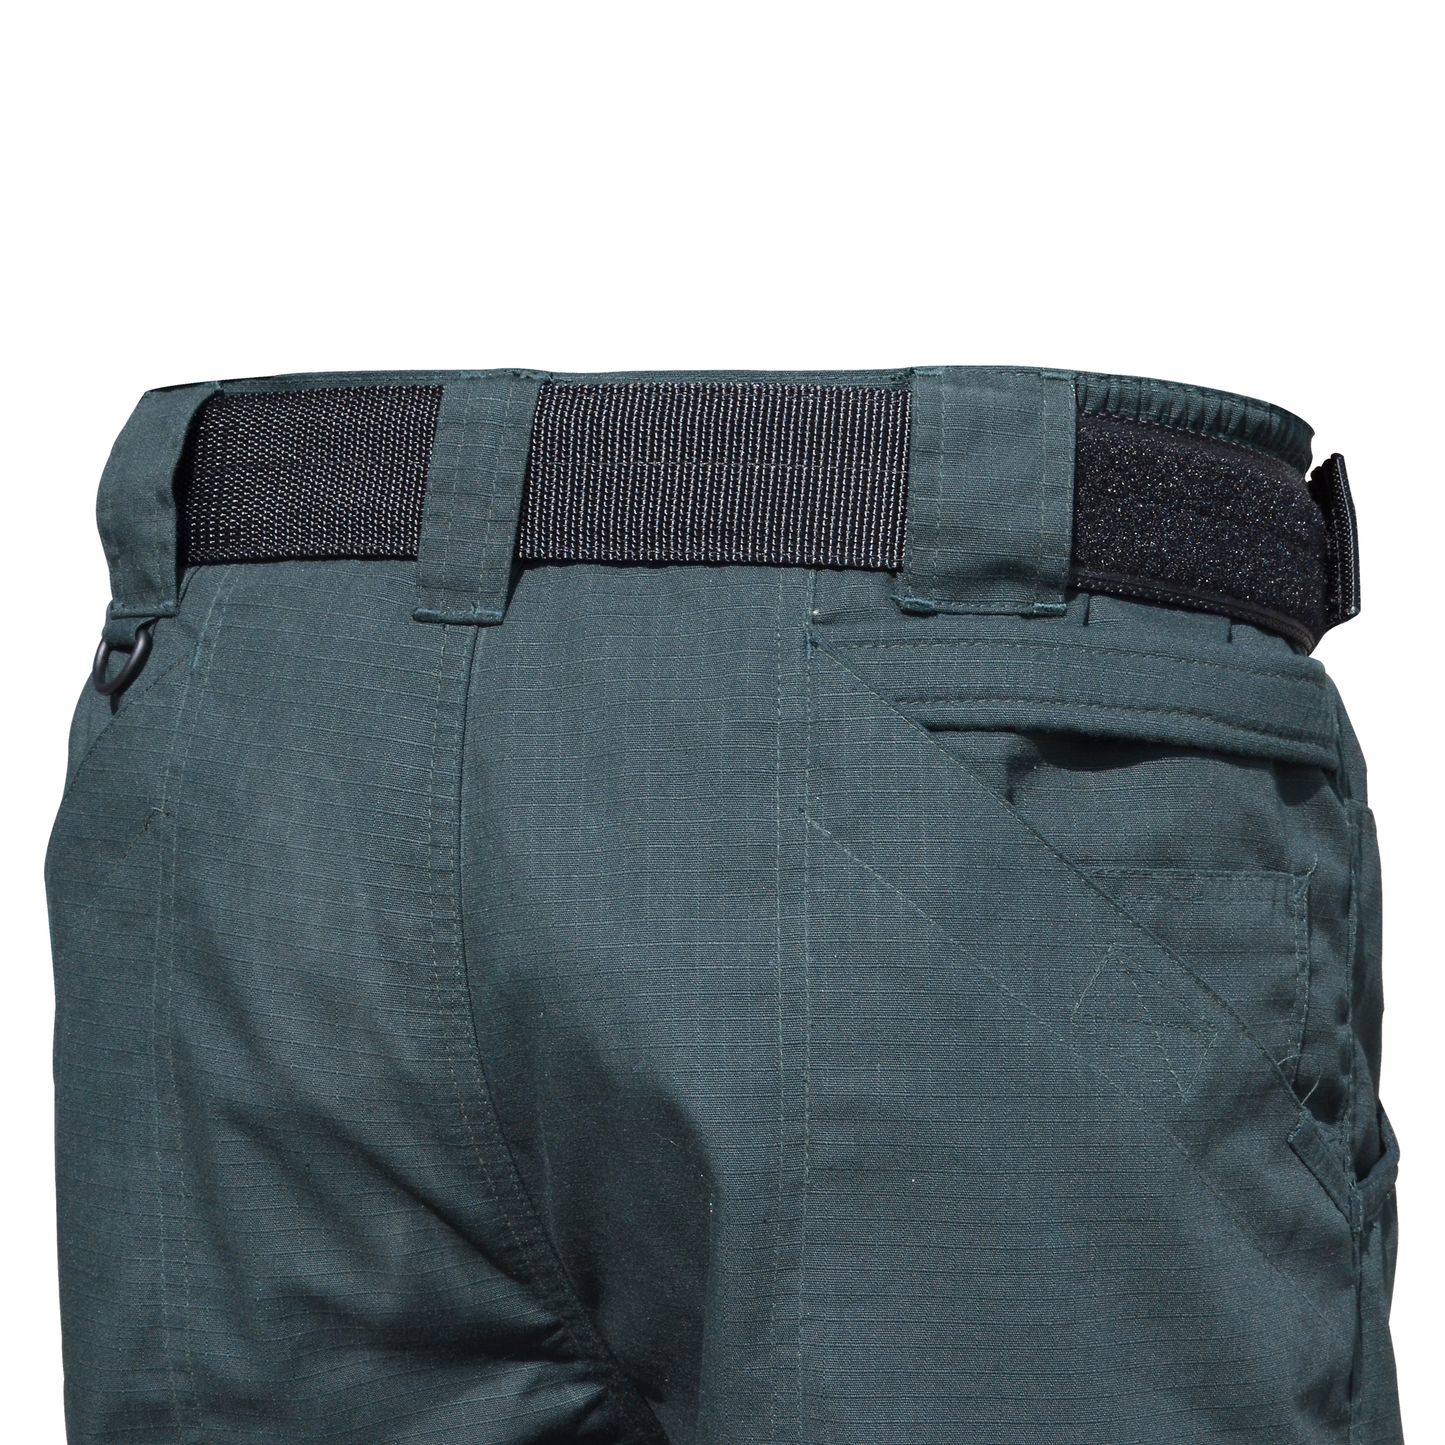 Niton Tactical RipStop EMS Trousers 34" Leg - Midnight Green